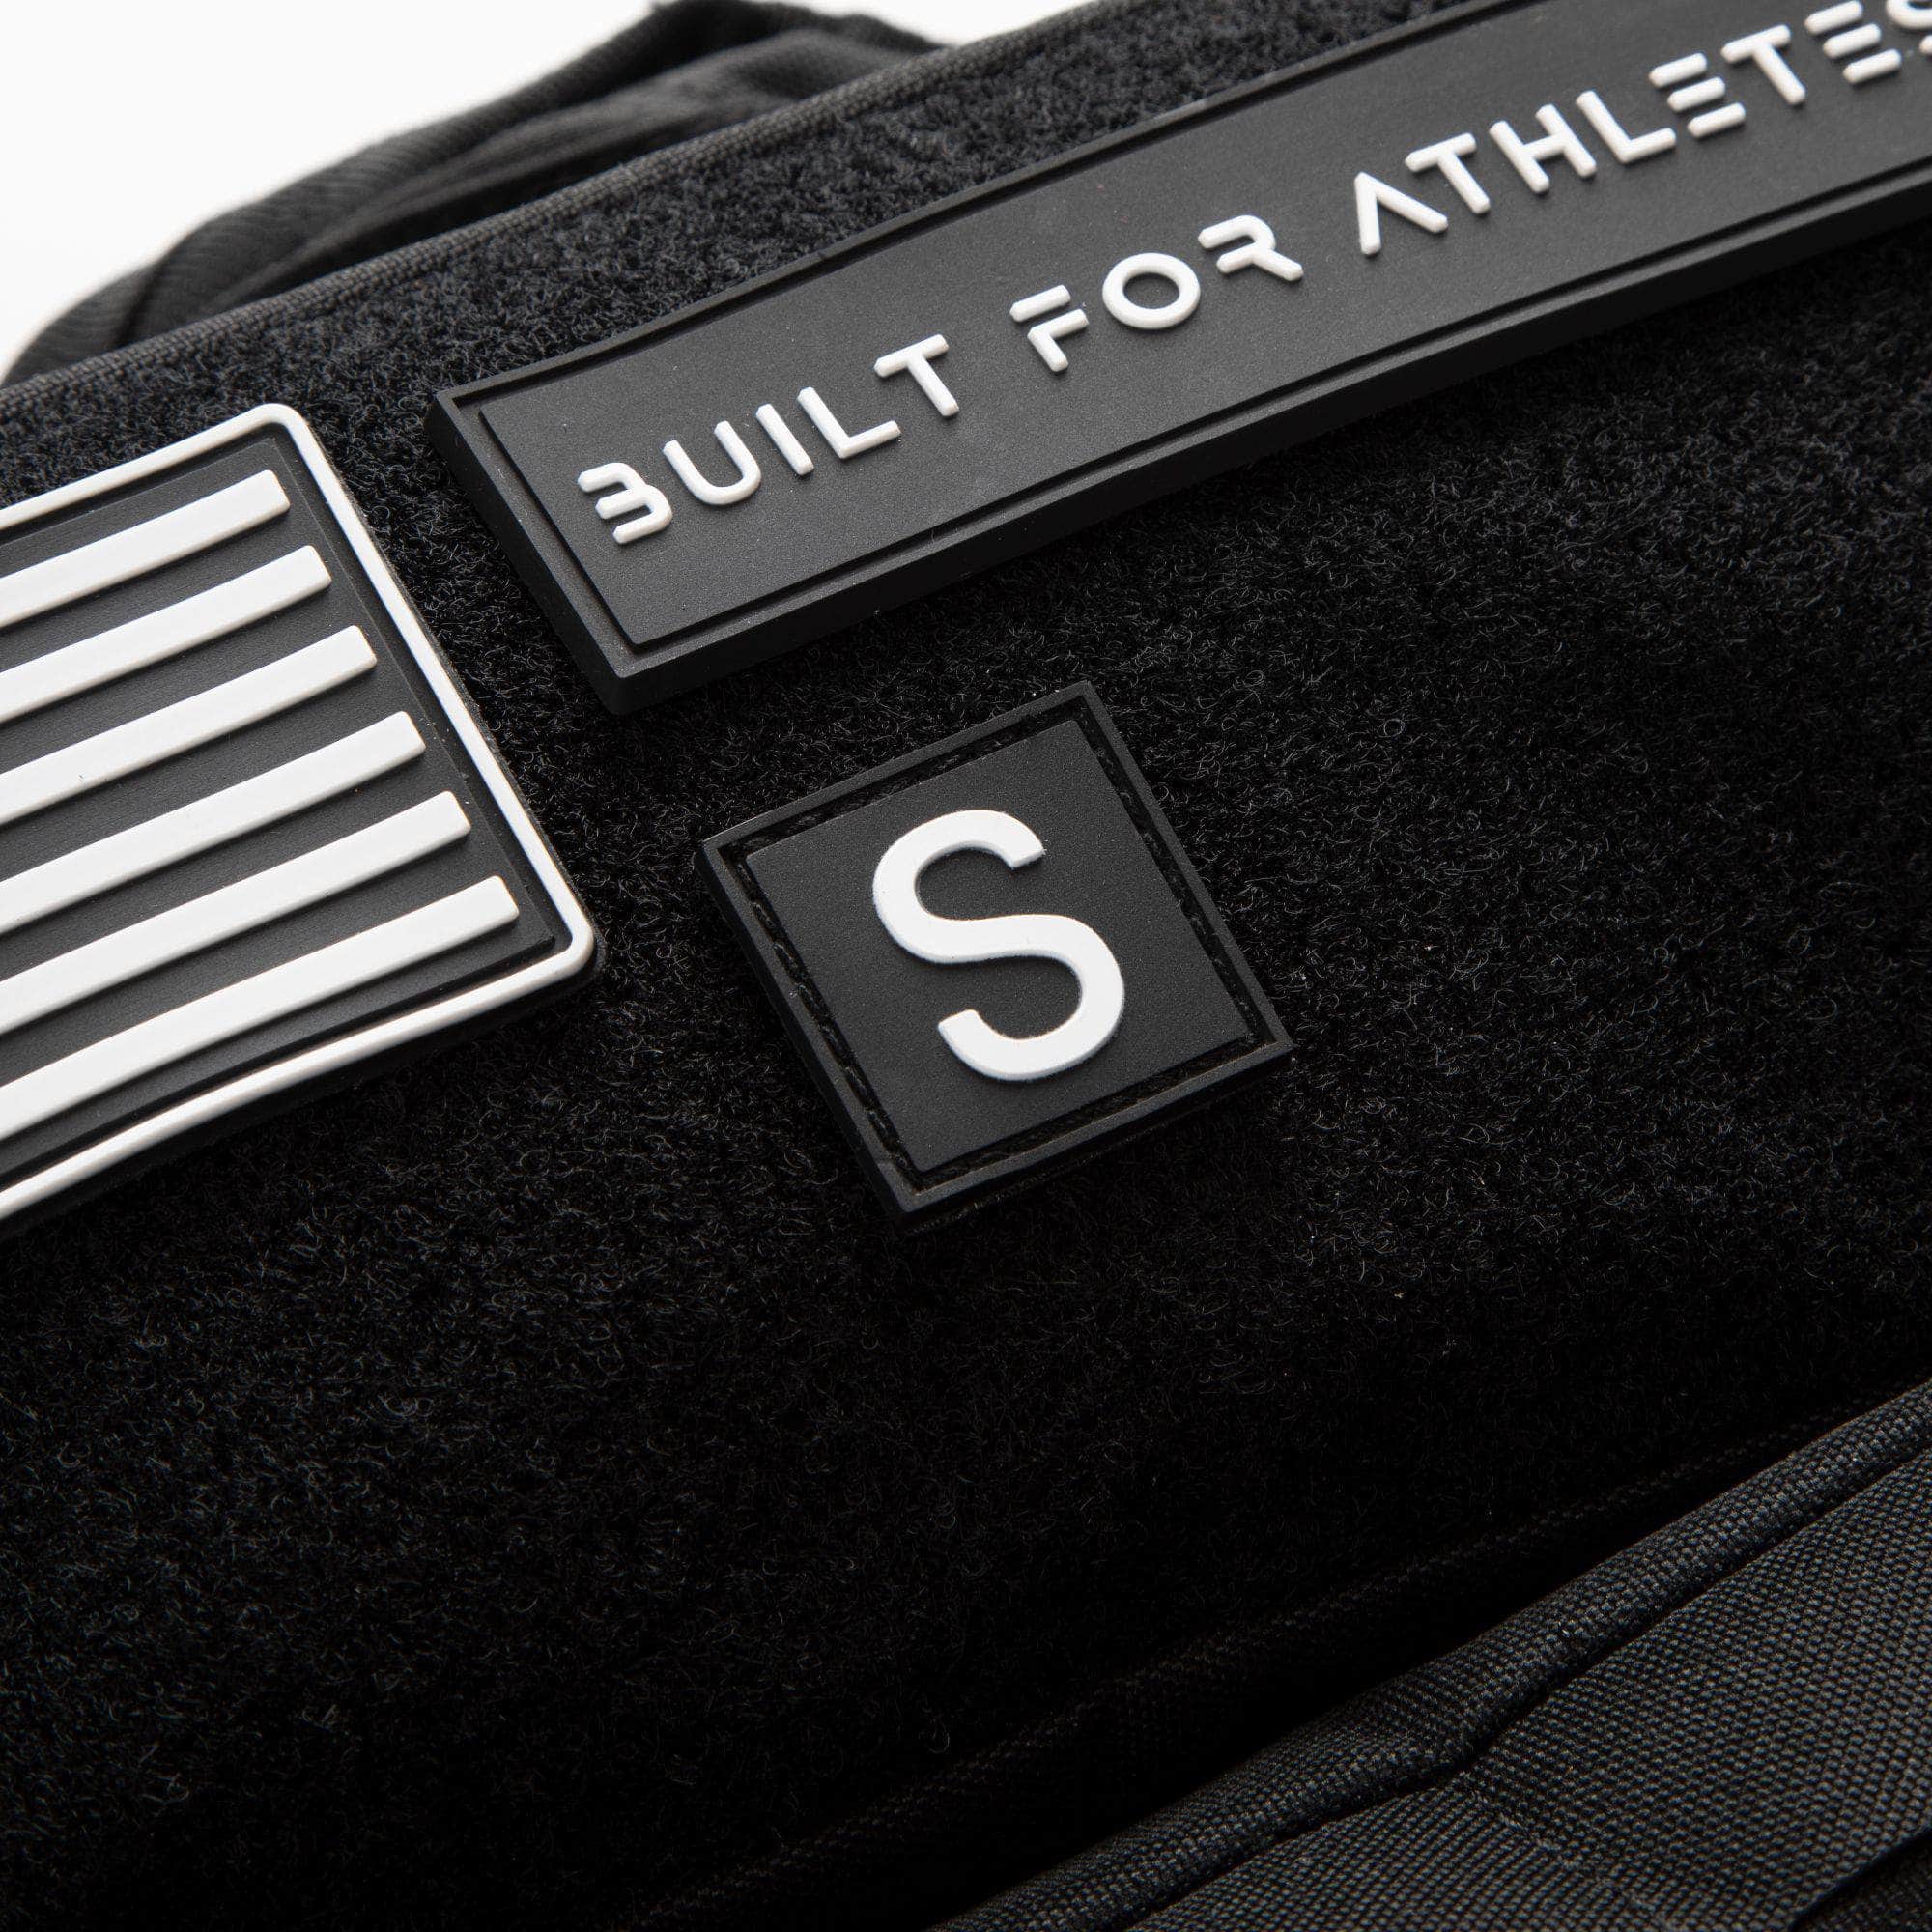 Built for Athletes Patches Letter Rubber Patches